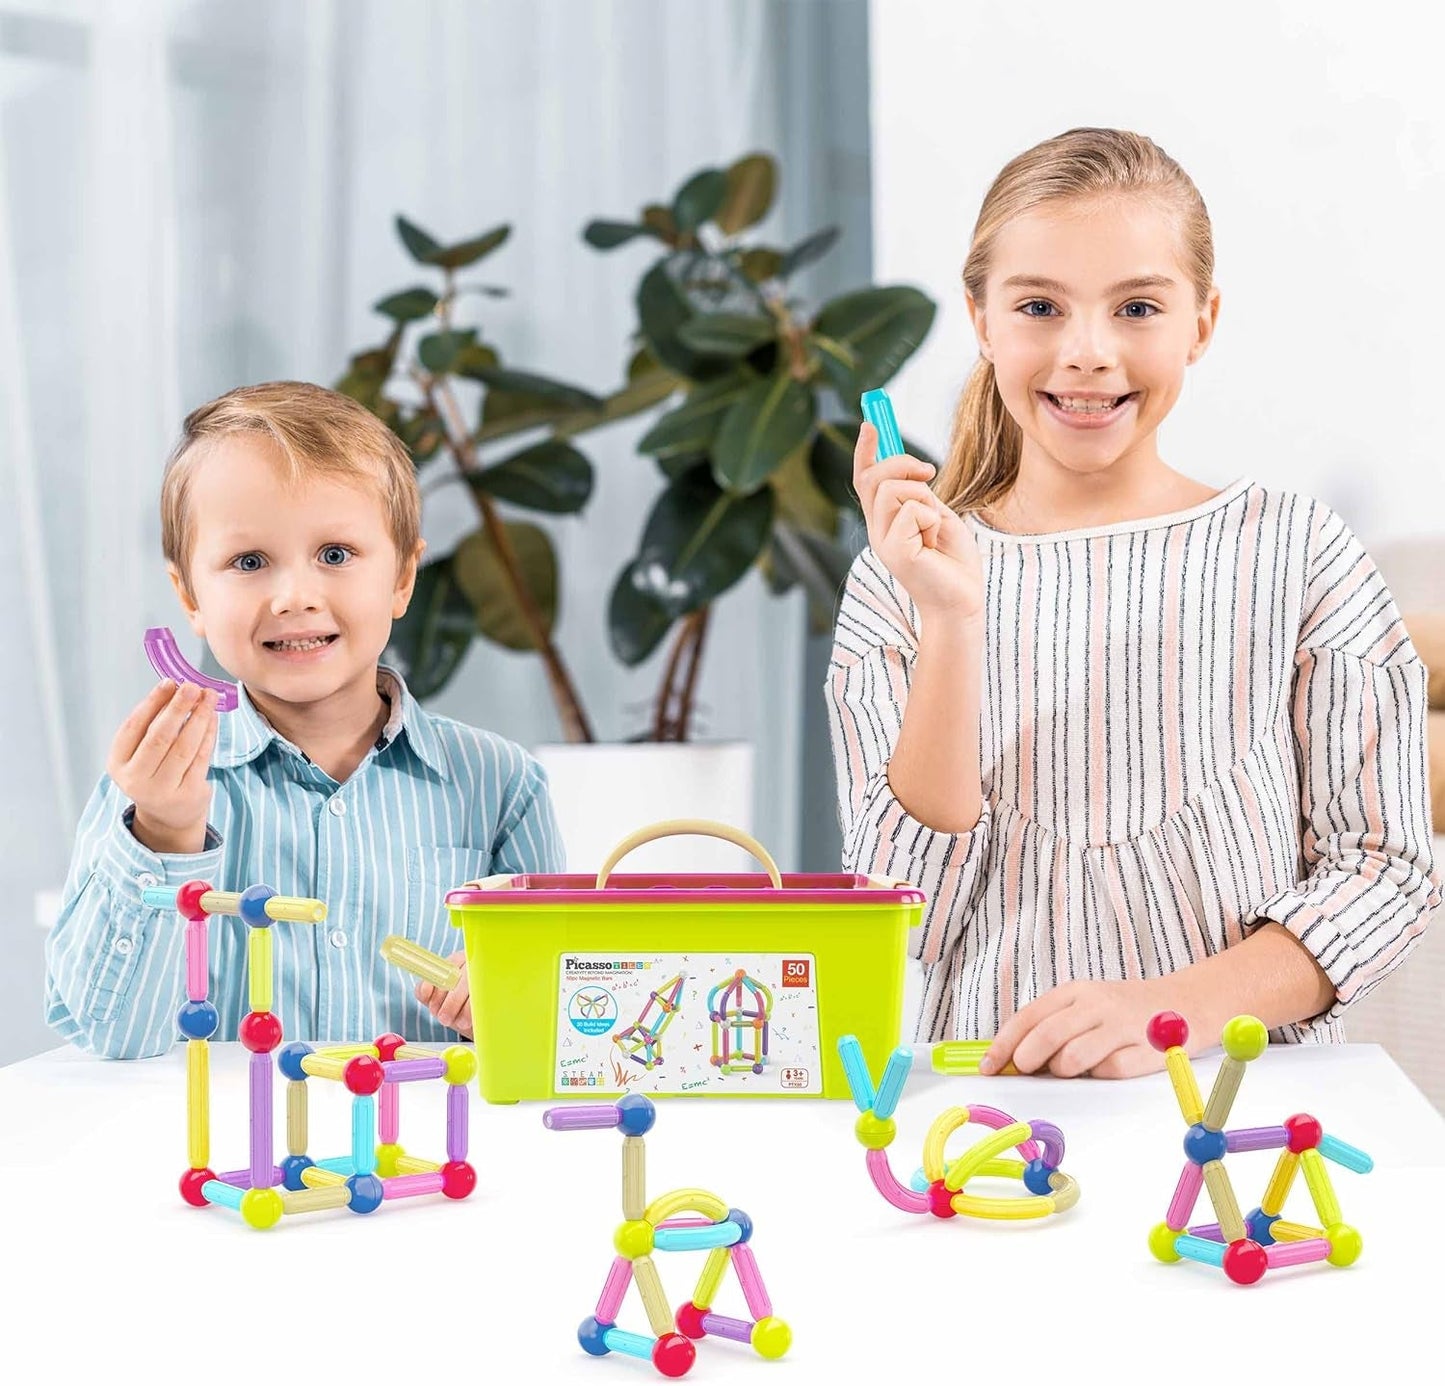 Picassotiles 50 Pcs Magnetic Building Stick Block Construction Set with Storage Bin Colorful 3D STEM Toy Blocks Bar Balls & Rods Montessori Educational for All Ages Puzzle Toy for Boys & Girls PTX50